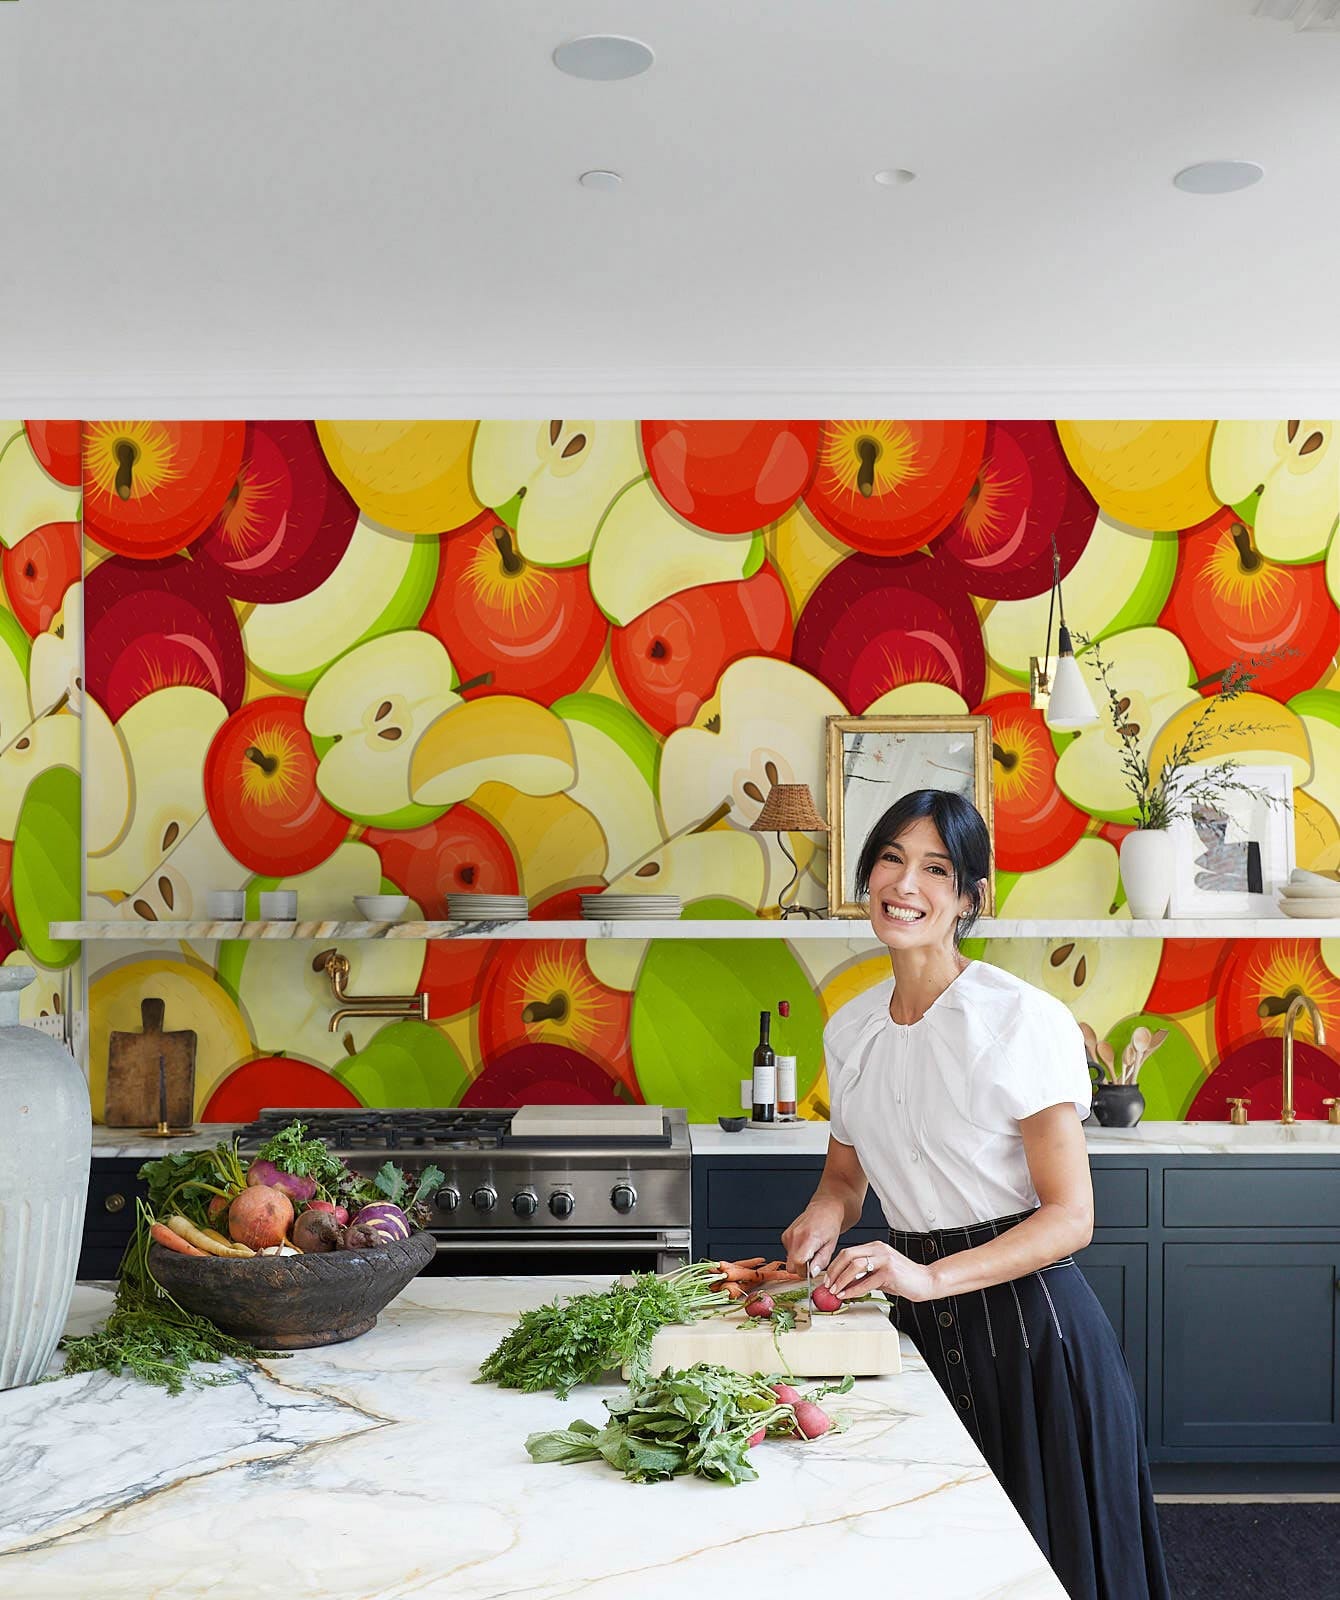 wallpaper of apples in red and green colors for the kitchen